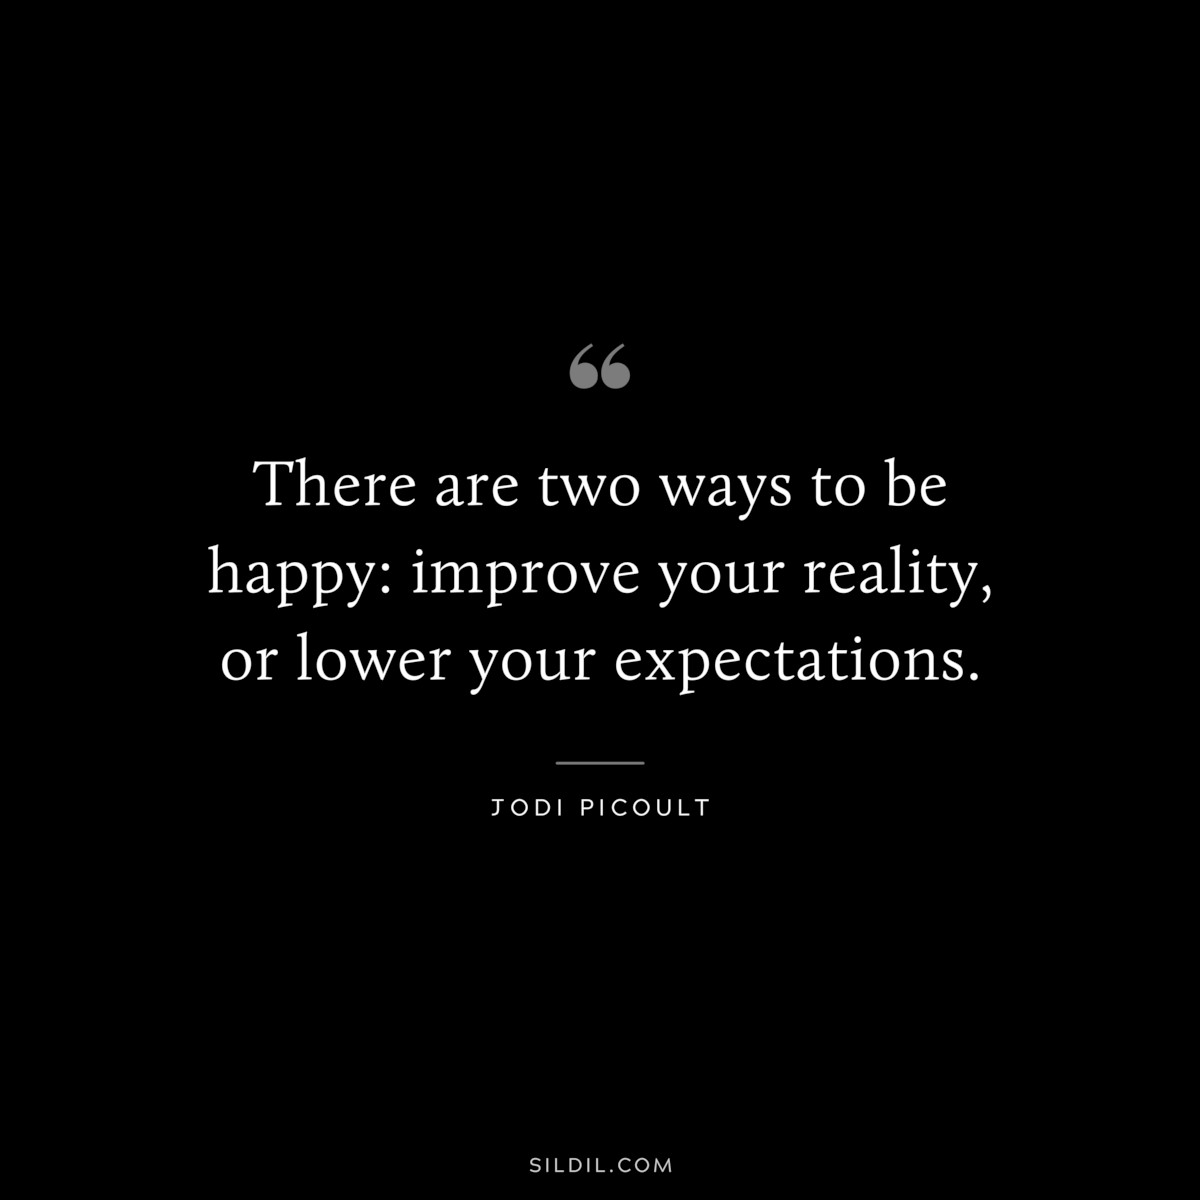 There are two ways to be happy: improve your reality, or lower your expectations. ― Jodi Picoult